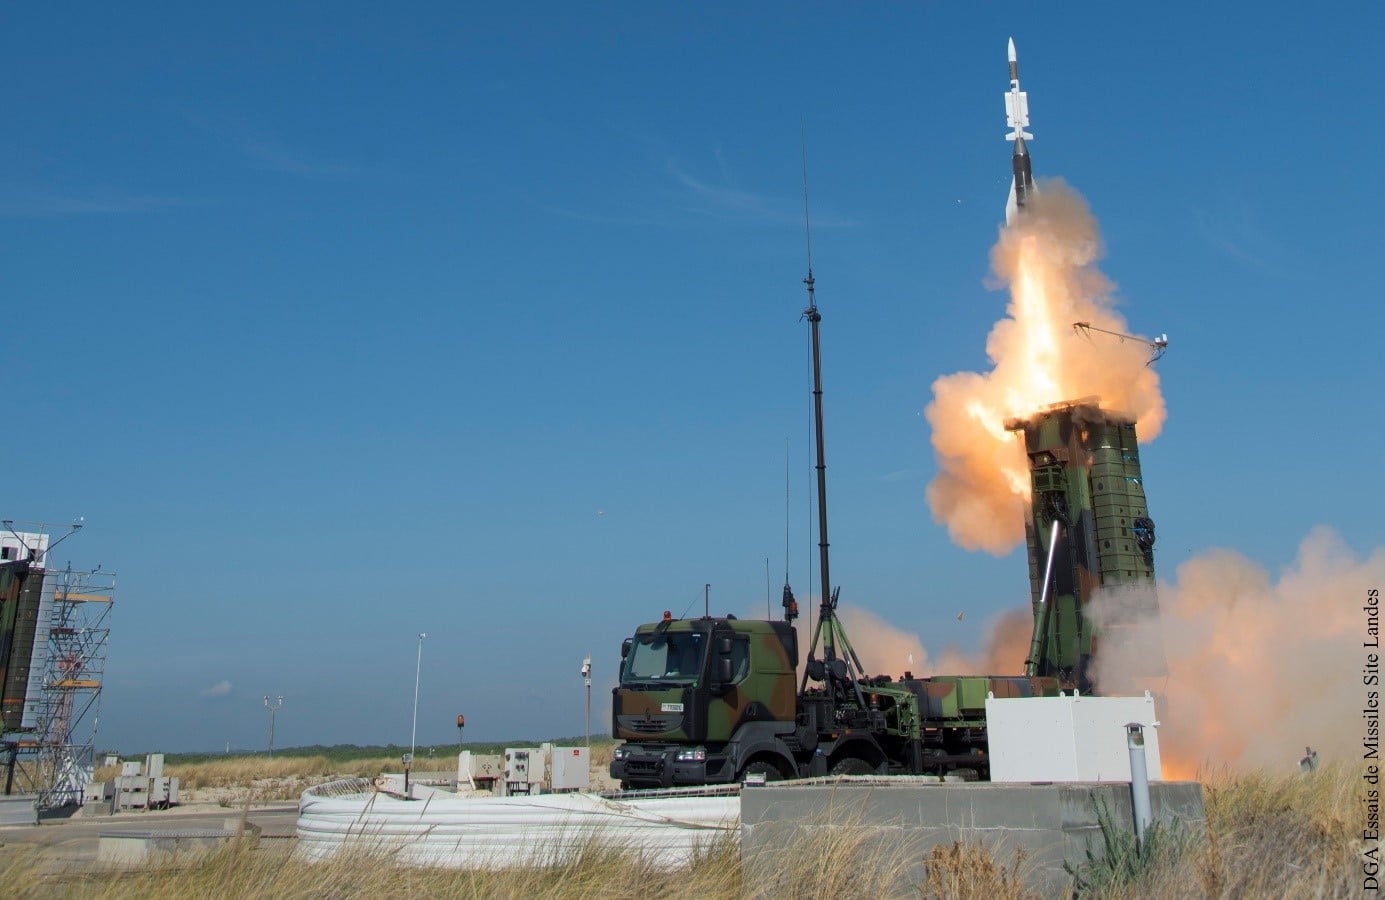 Italy and France to receive next-generation SAMP/T NG air defence systems